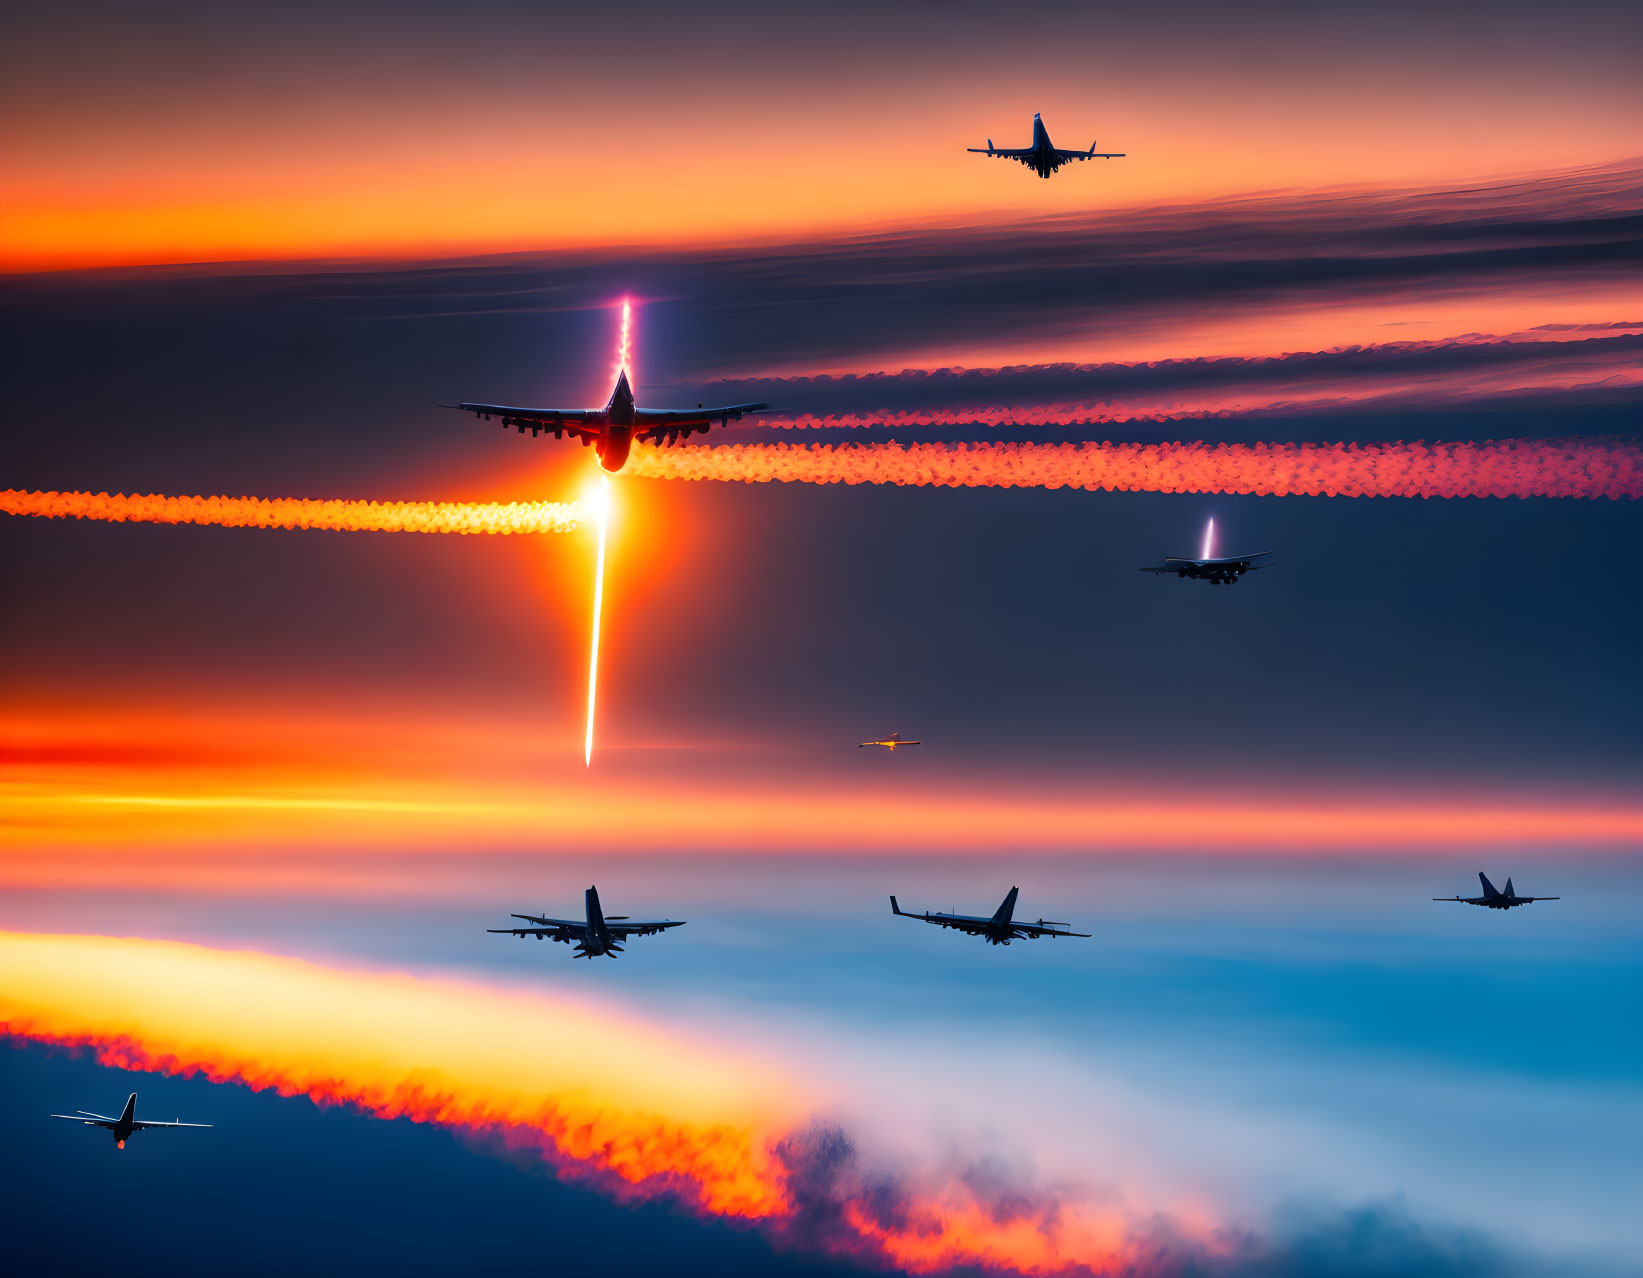 Planes dogfighting at sunset